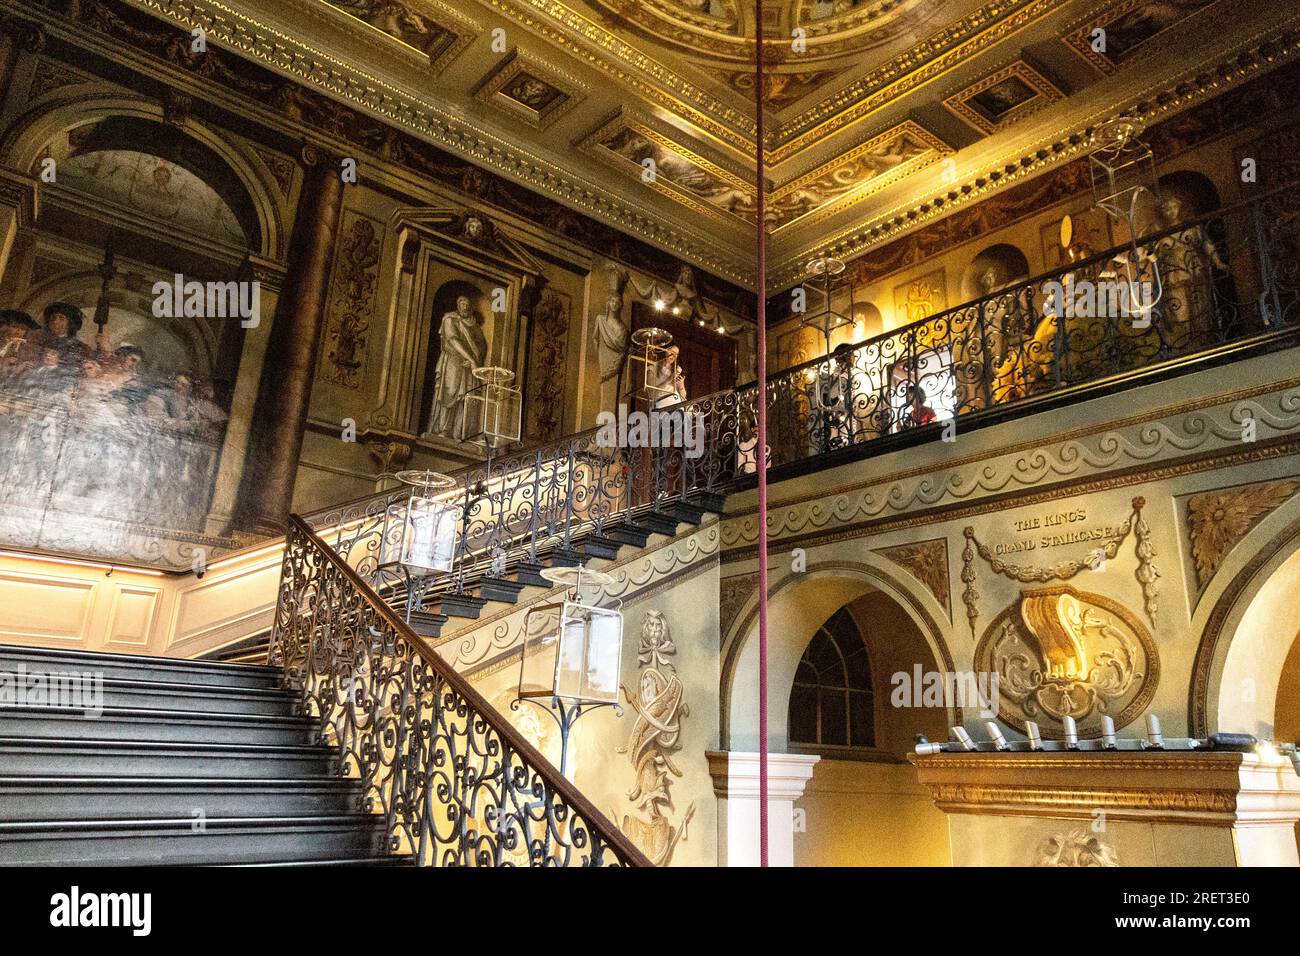 The King's Staircase at Kensington Palace with walls painted by William Kent, London, England Stock Photo